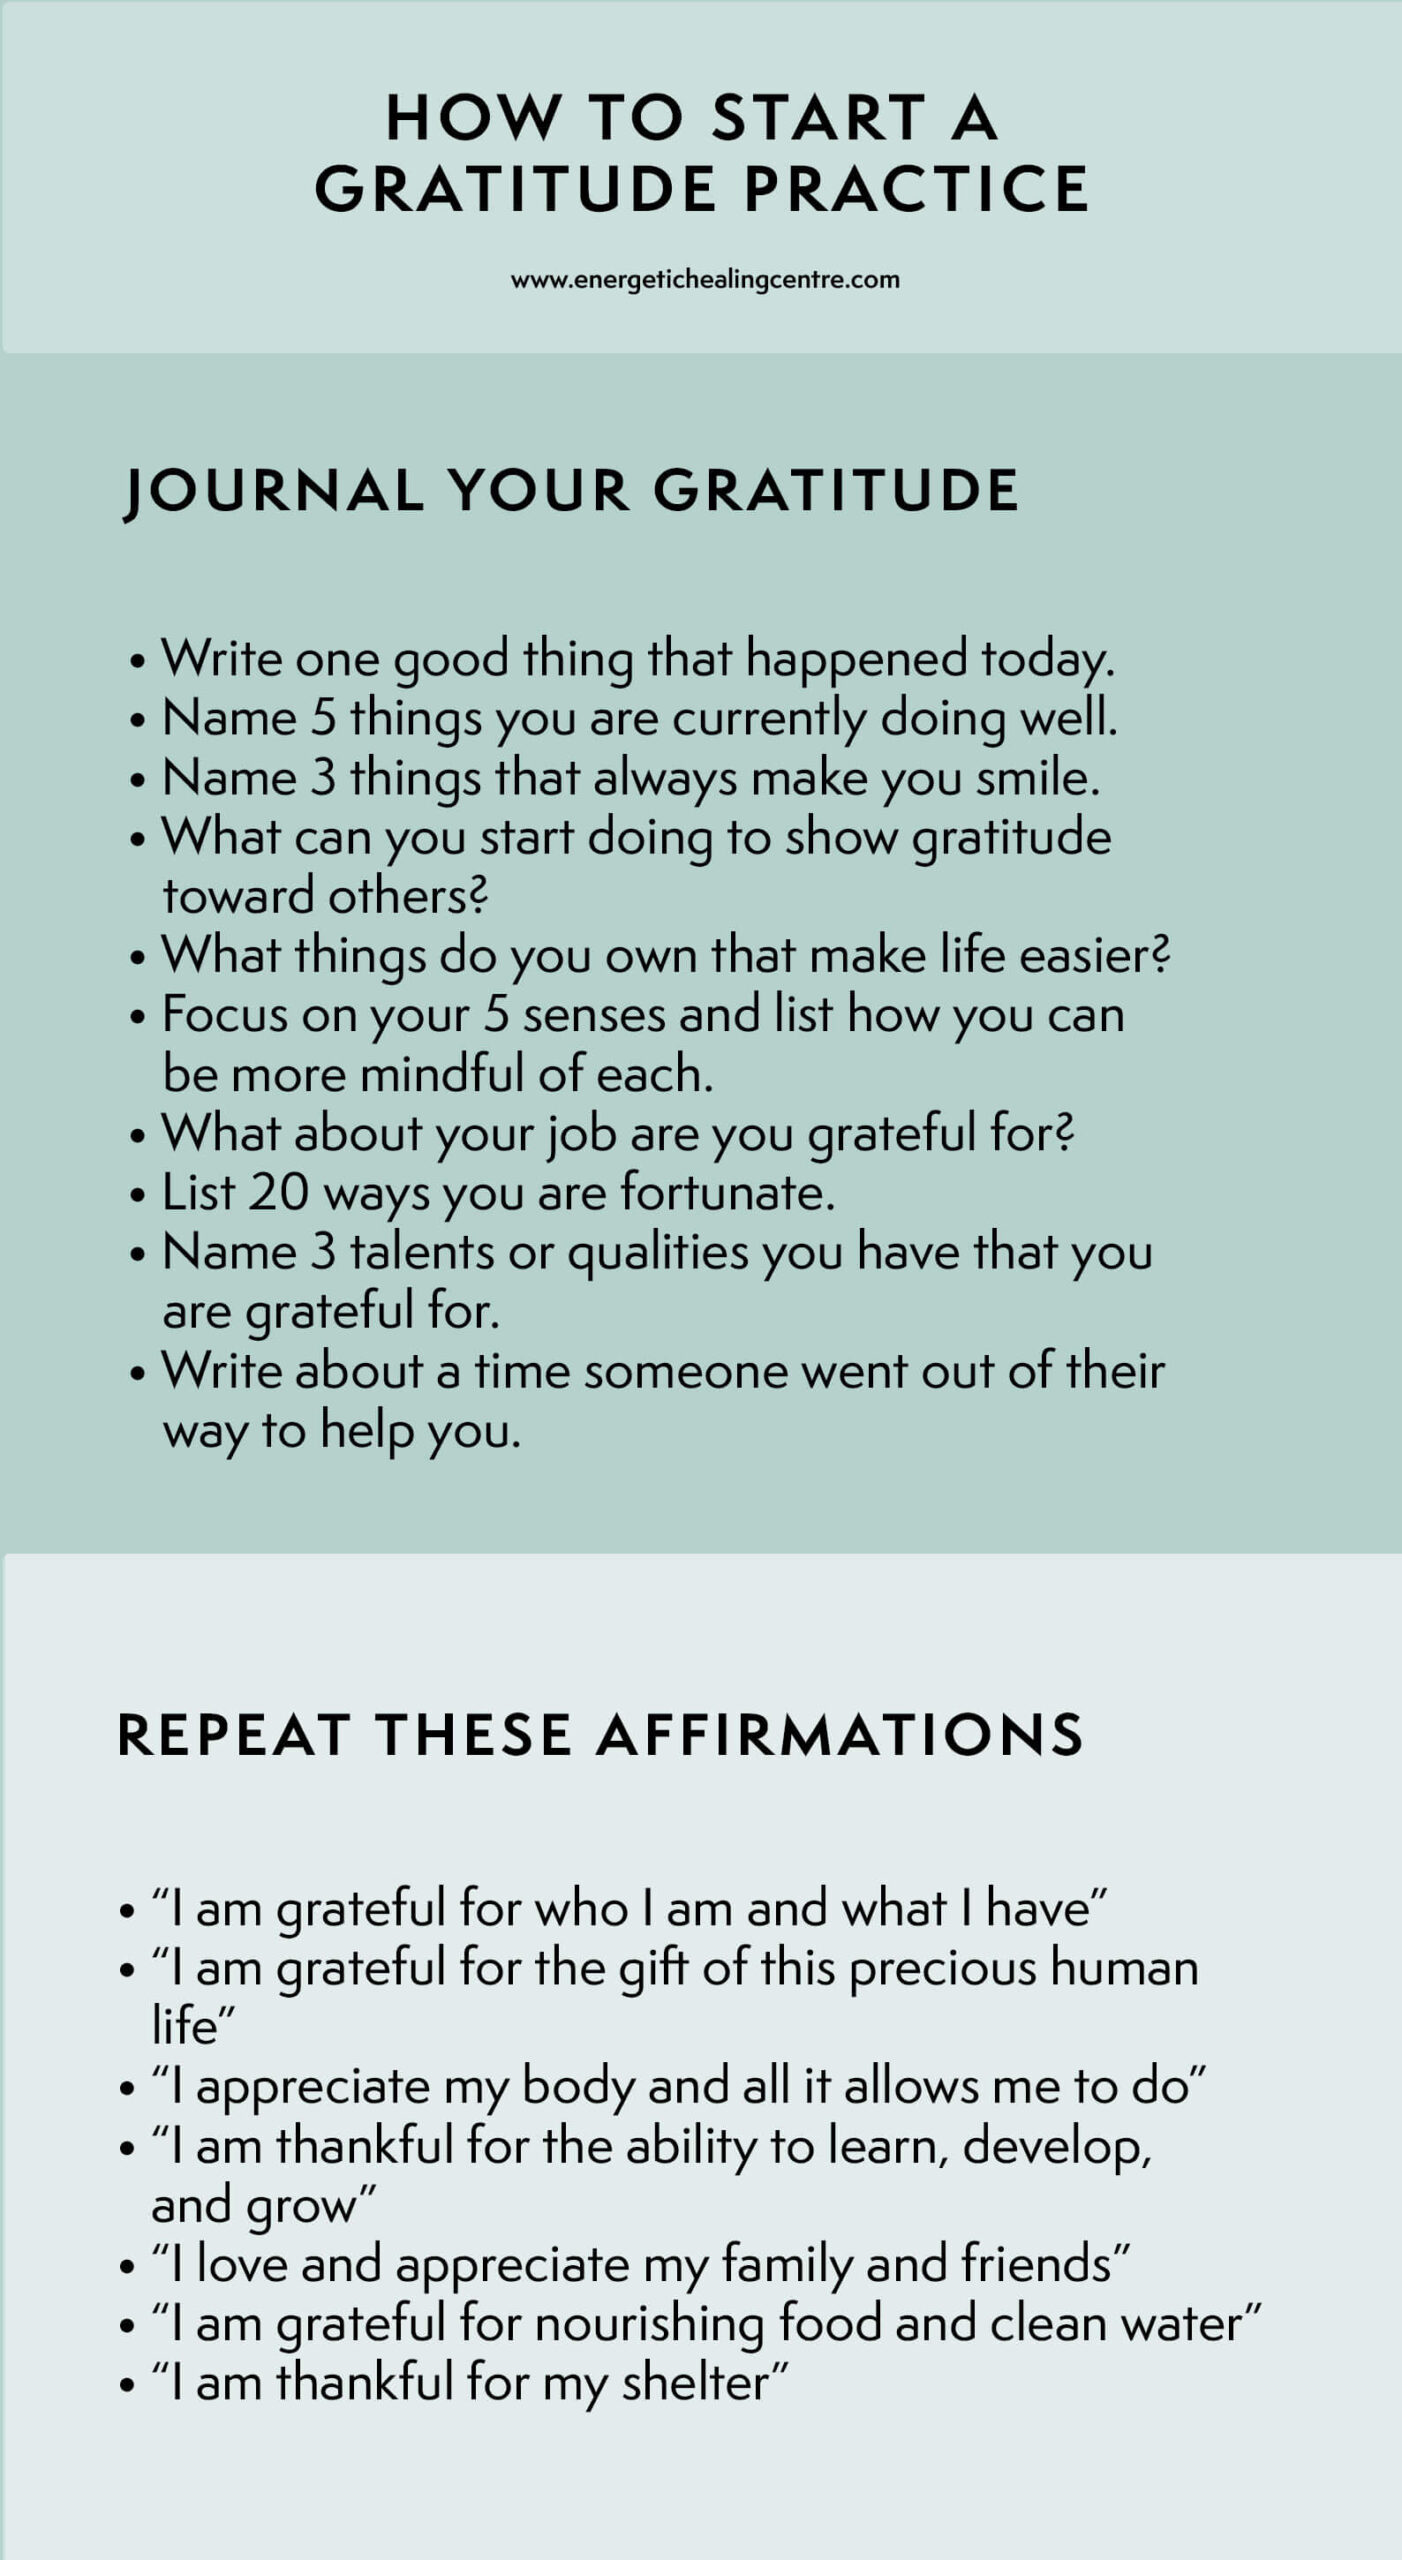 affirmations + journal prompt for starting a gratitude practice